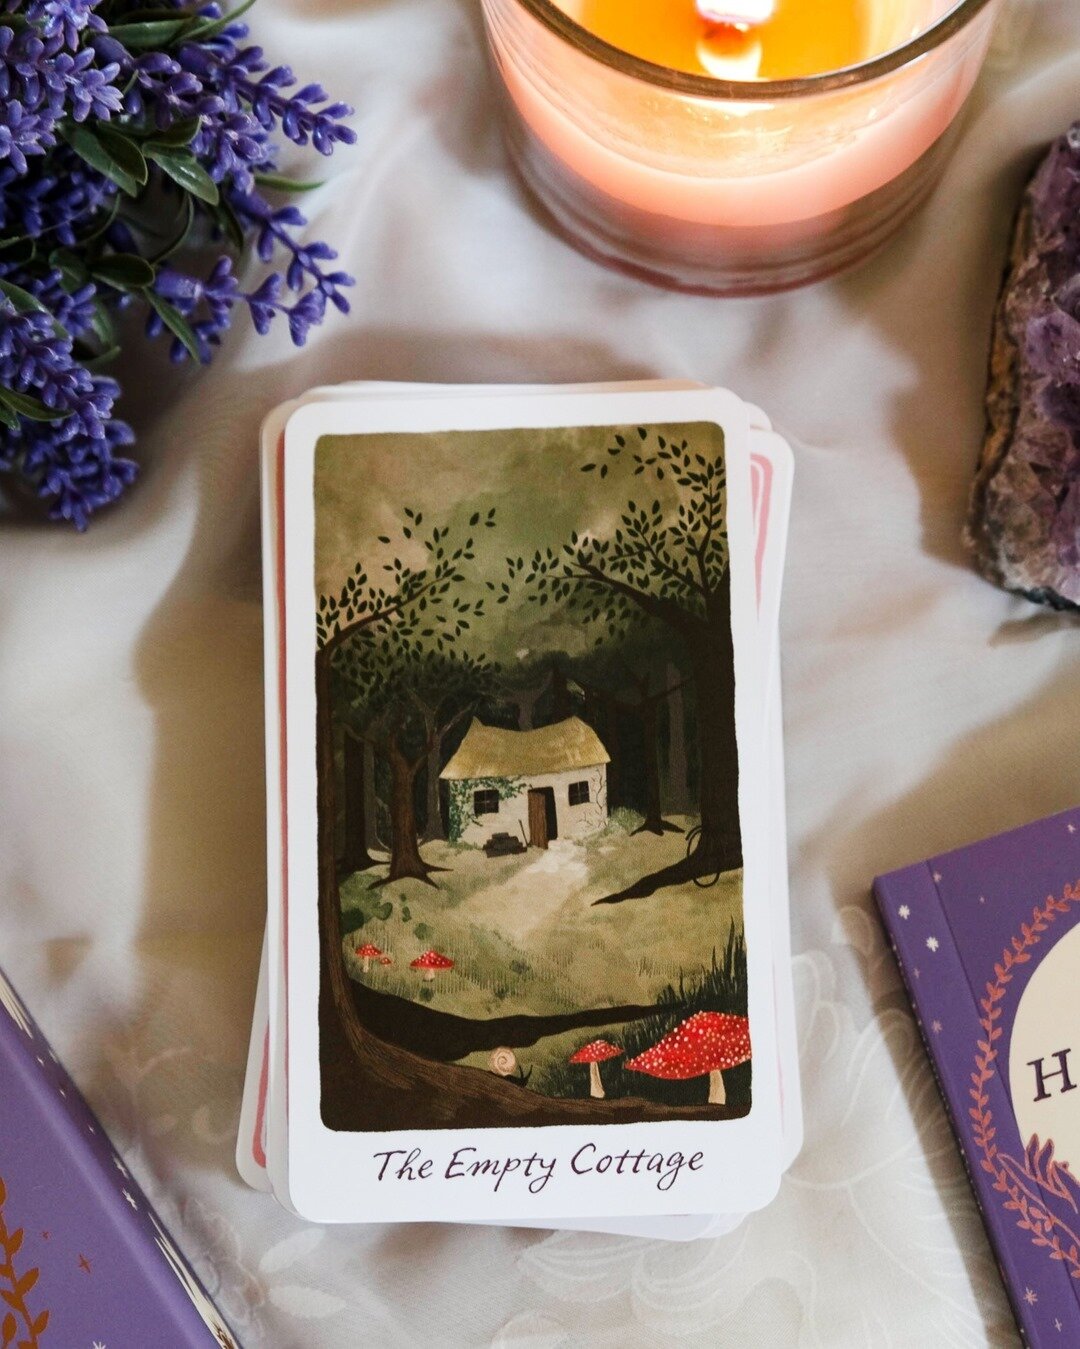 The beautiful Empty Cottage card 🏡 from The Harmony Tarot by @harmonybeatrix, illustrated by Laura Shelley ✨⠀⠀⠀⠀⠀⠀⠀⠀⠀
⠀⠀⠀⠀⠀⠀⠀⠀⠀
What does this card make you think and feel? Does it resonate with you? If you're seeing this, maybe this message is for 